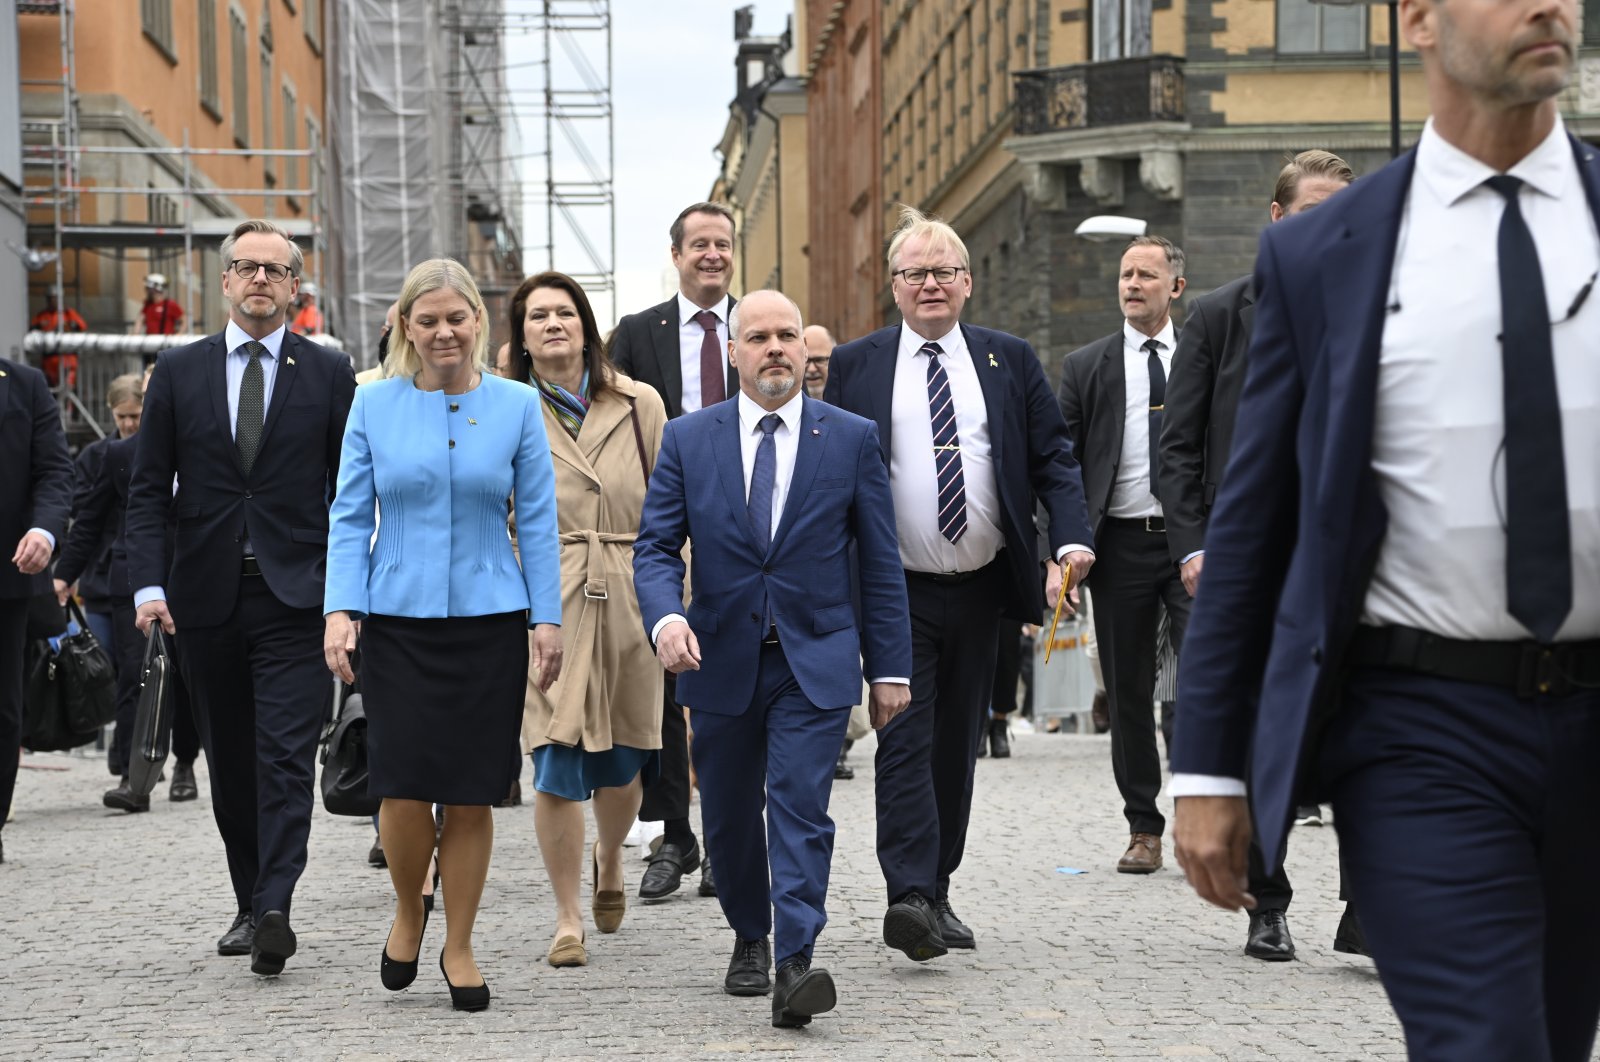 Swedish Prime Minister Magdalena Andersson (L) leads Cabinet members to a no-confidence vote in the Swedish parliament in Stockholm, Sweden, June 7, 2022. (EPA Photo)